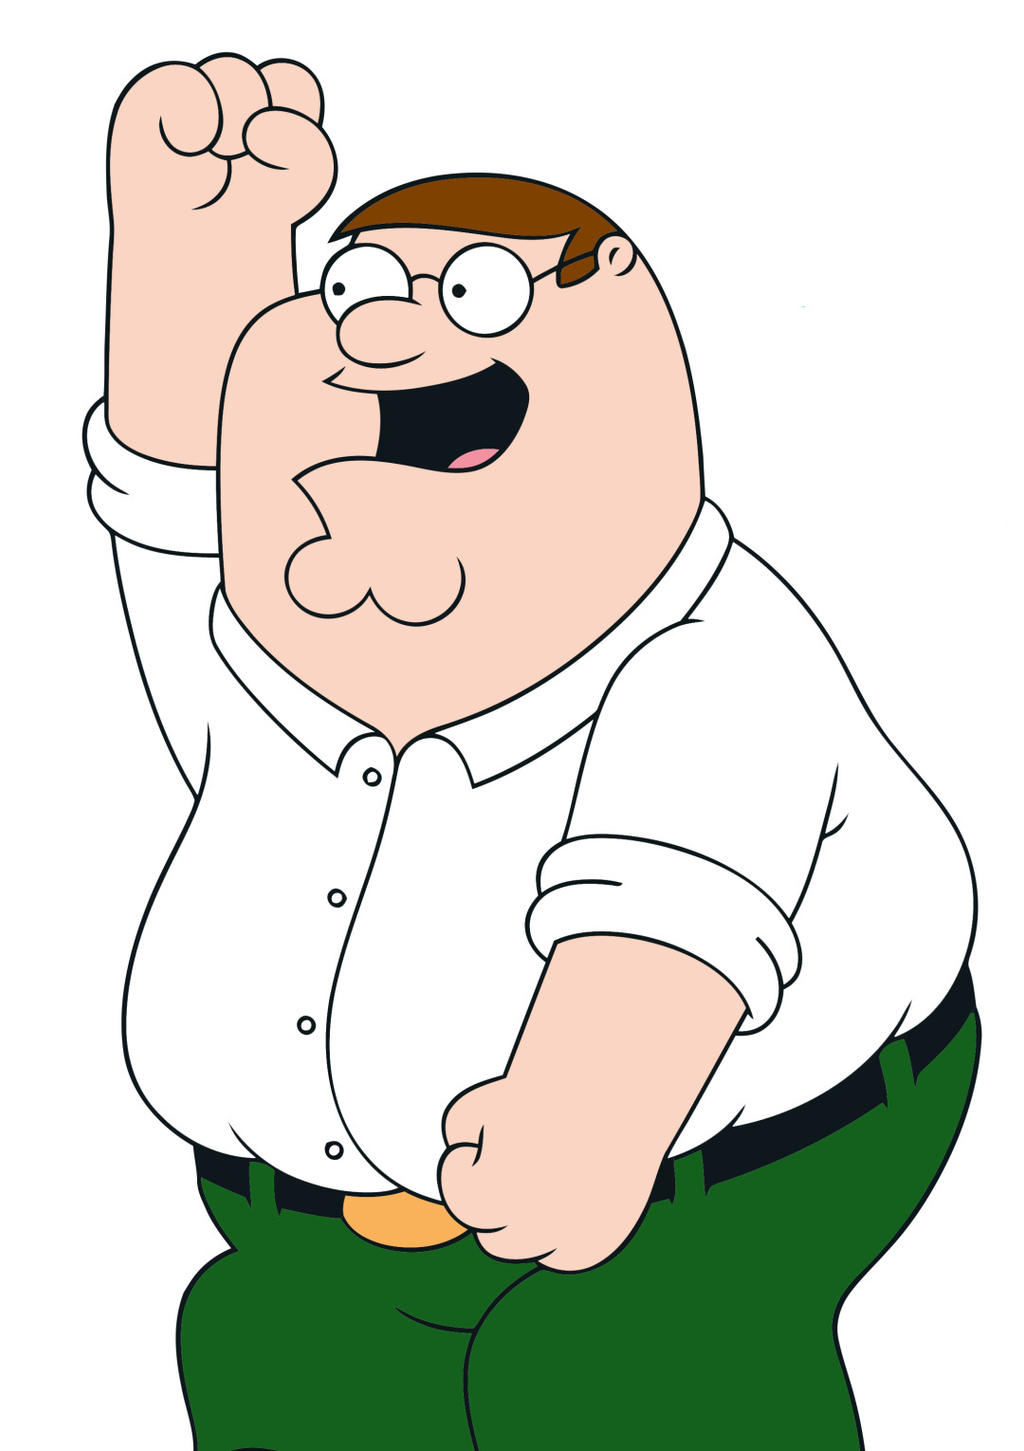 Peter Griffin Images & Pictures - Becuo